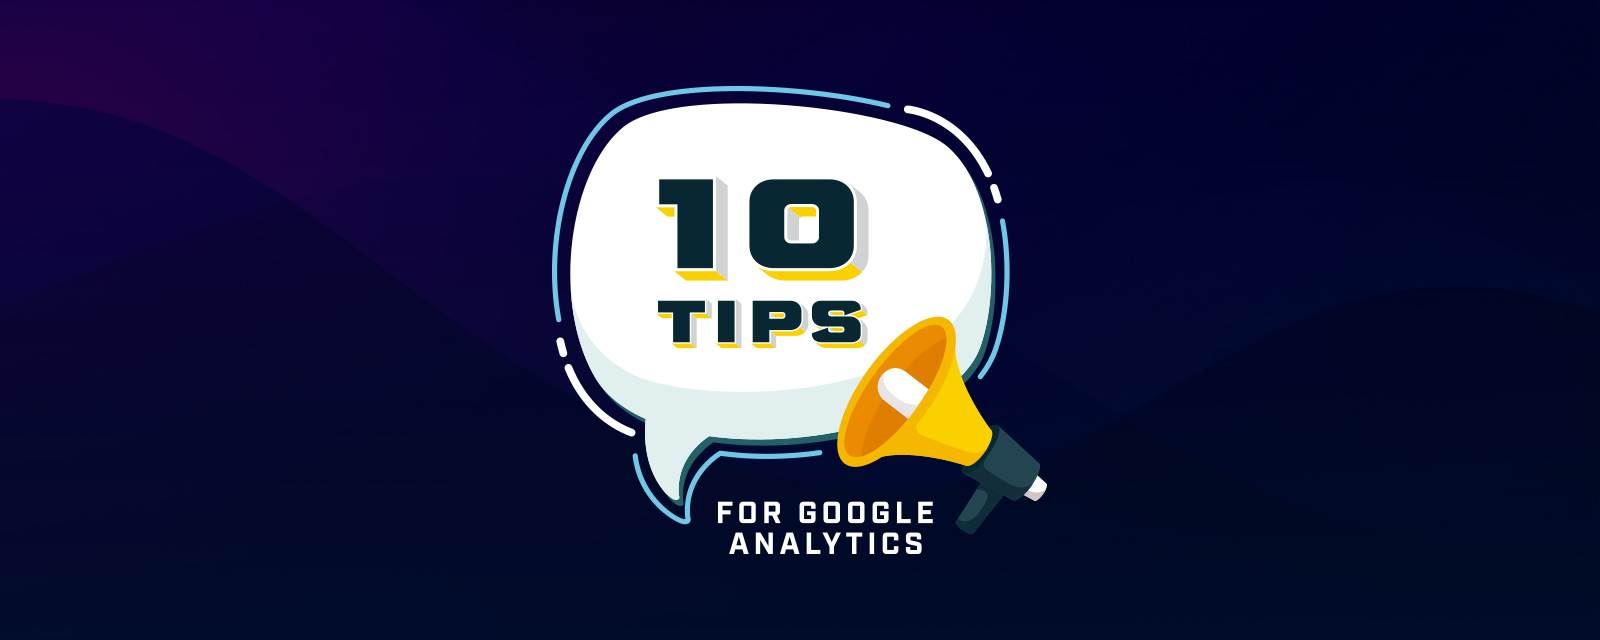 Go to 10 Tips to Make Google Analytics Your Secret Weapon  blog post